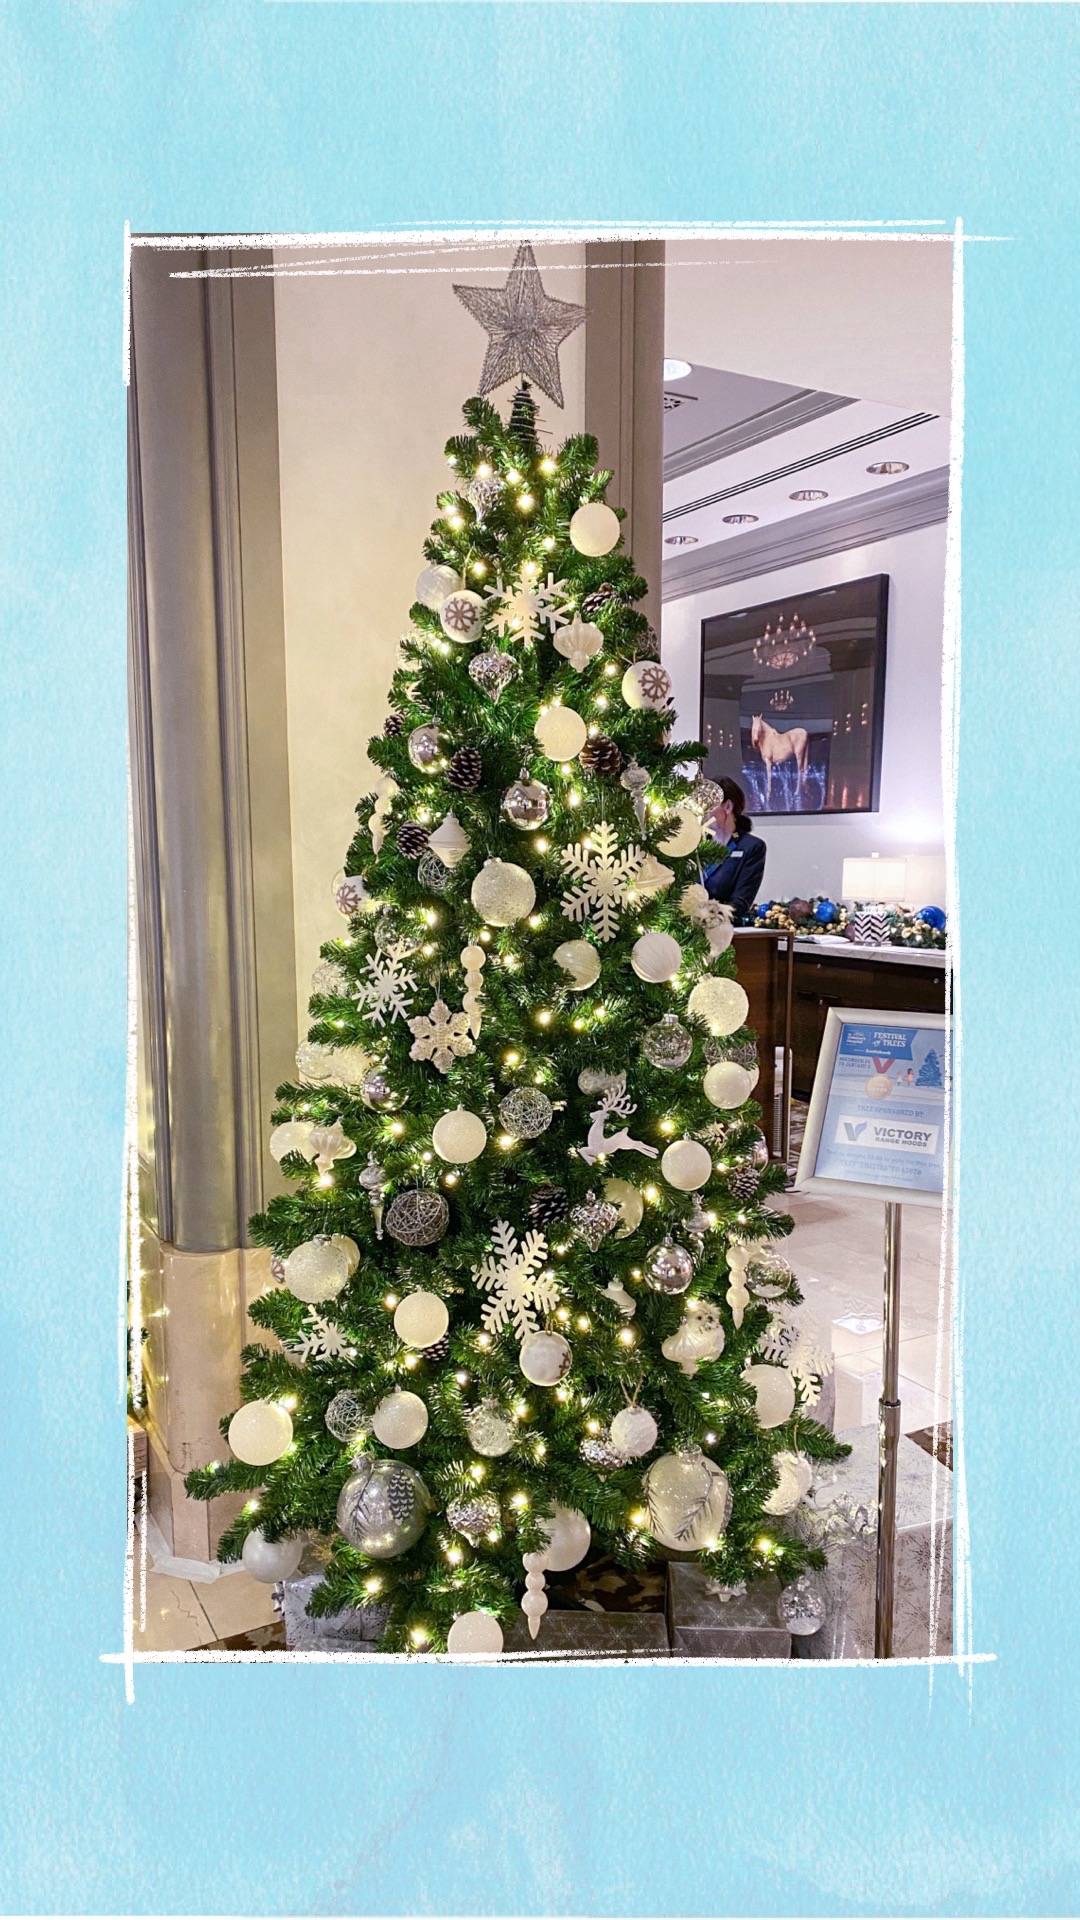 A holiday tree decorated with white and silver ornaments for the BCCHF Festival of Trees